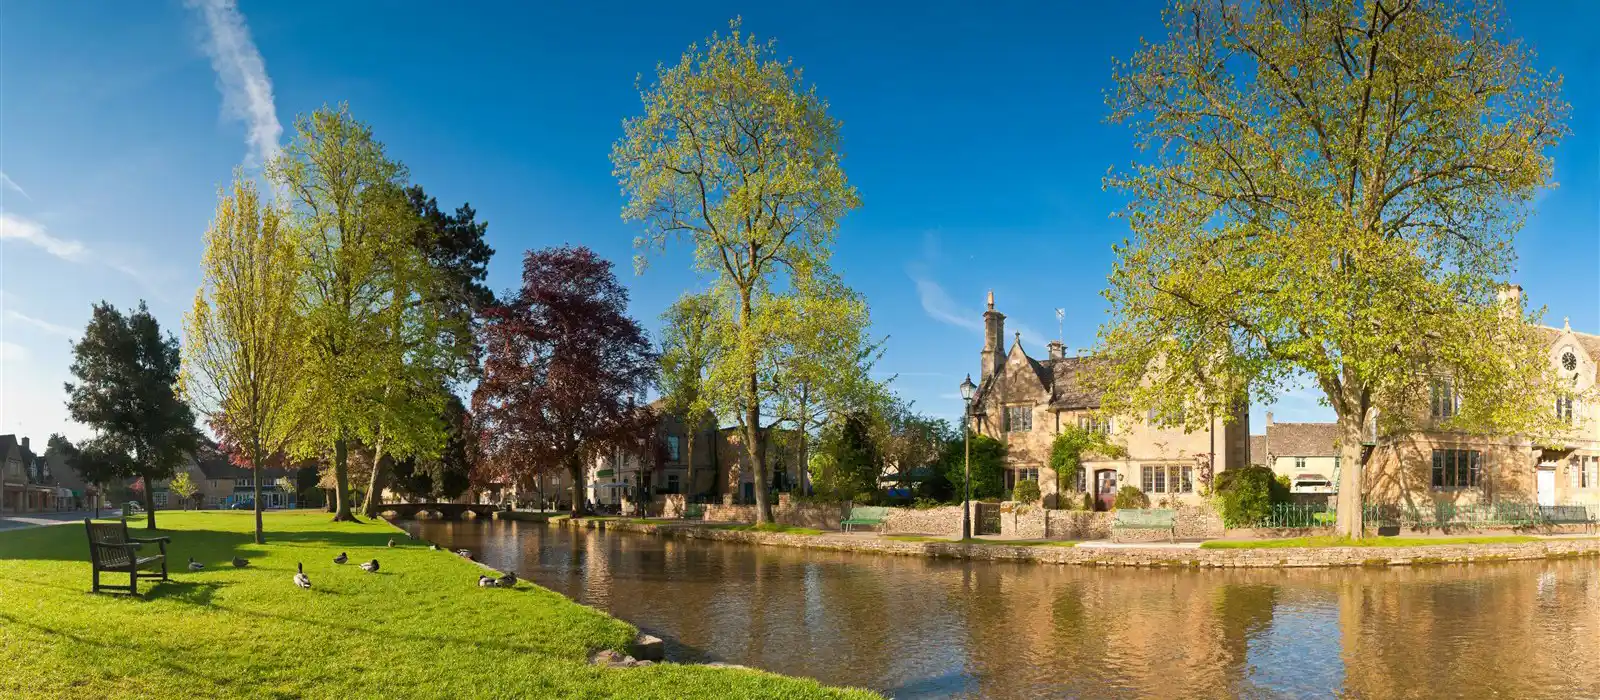 Bourton-on-the-Water, Cotswolds, Gloucestershire